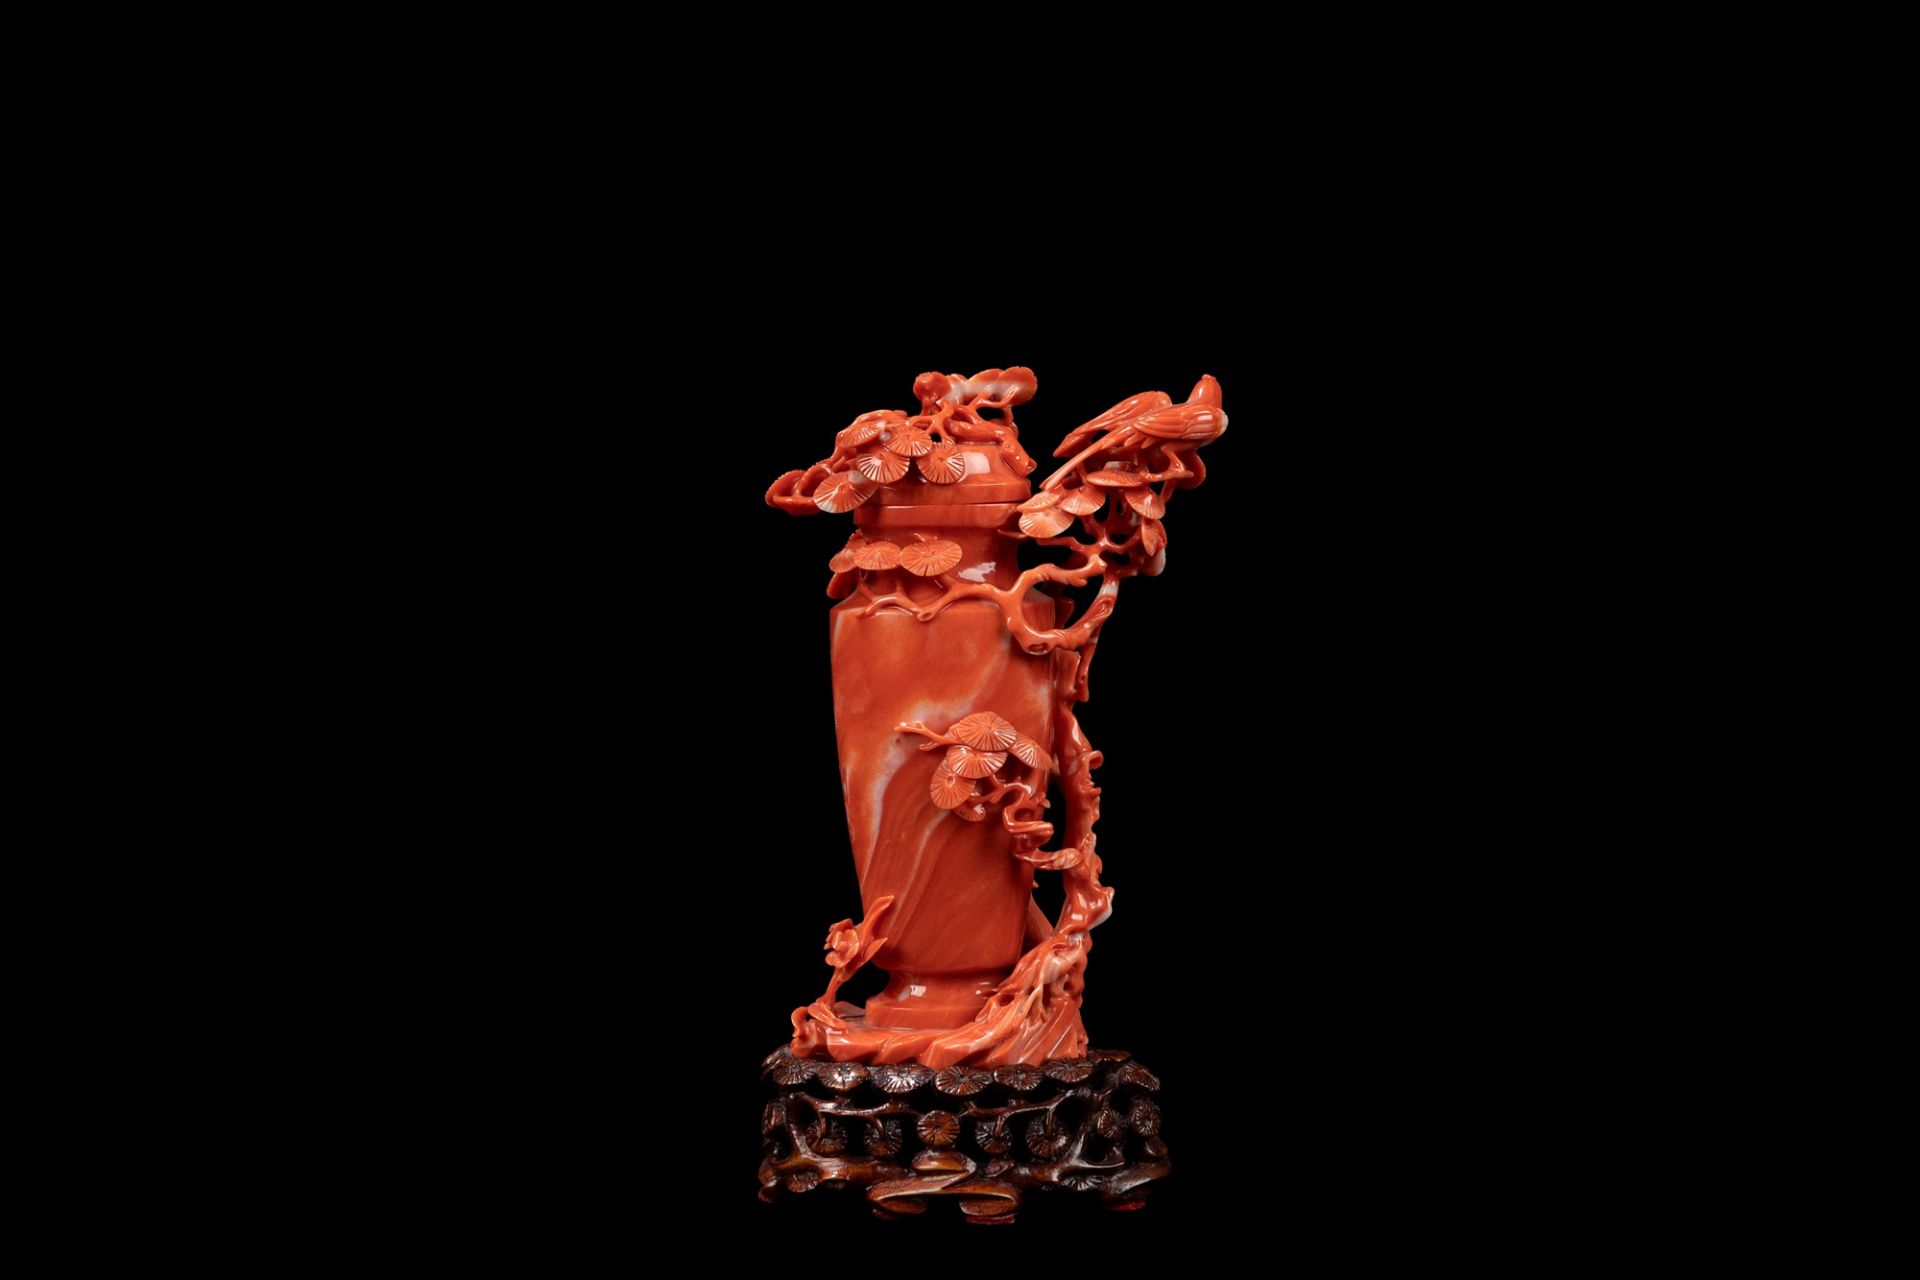 A SMALL RED CORAL CARVING, China, Qing dynasty, late 19th century - Image 2 of 2